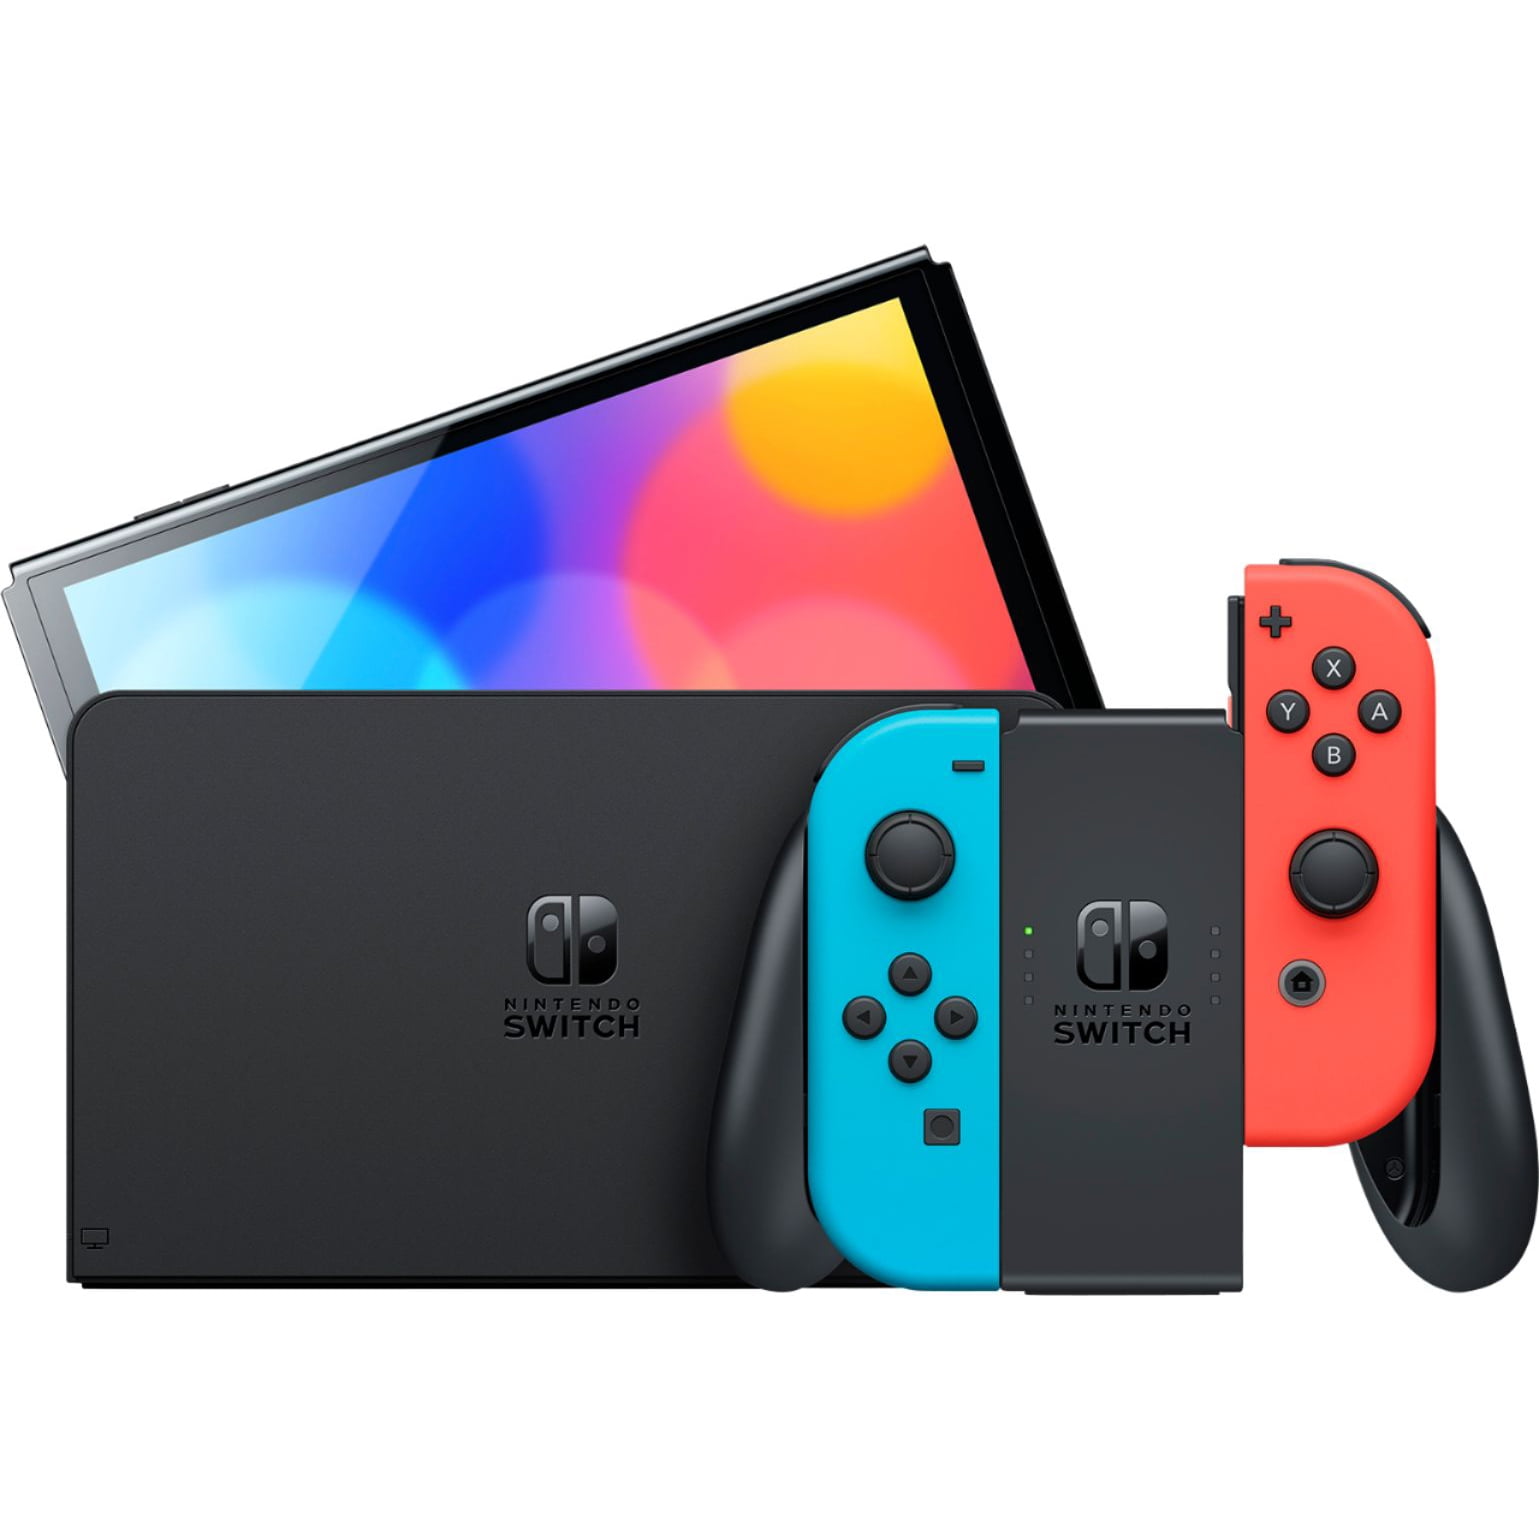 Nintendo Switch OLED Model with Neon Blue and Red Joy-Con, 64GB Internal  Storage, Black Dock - 7